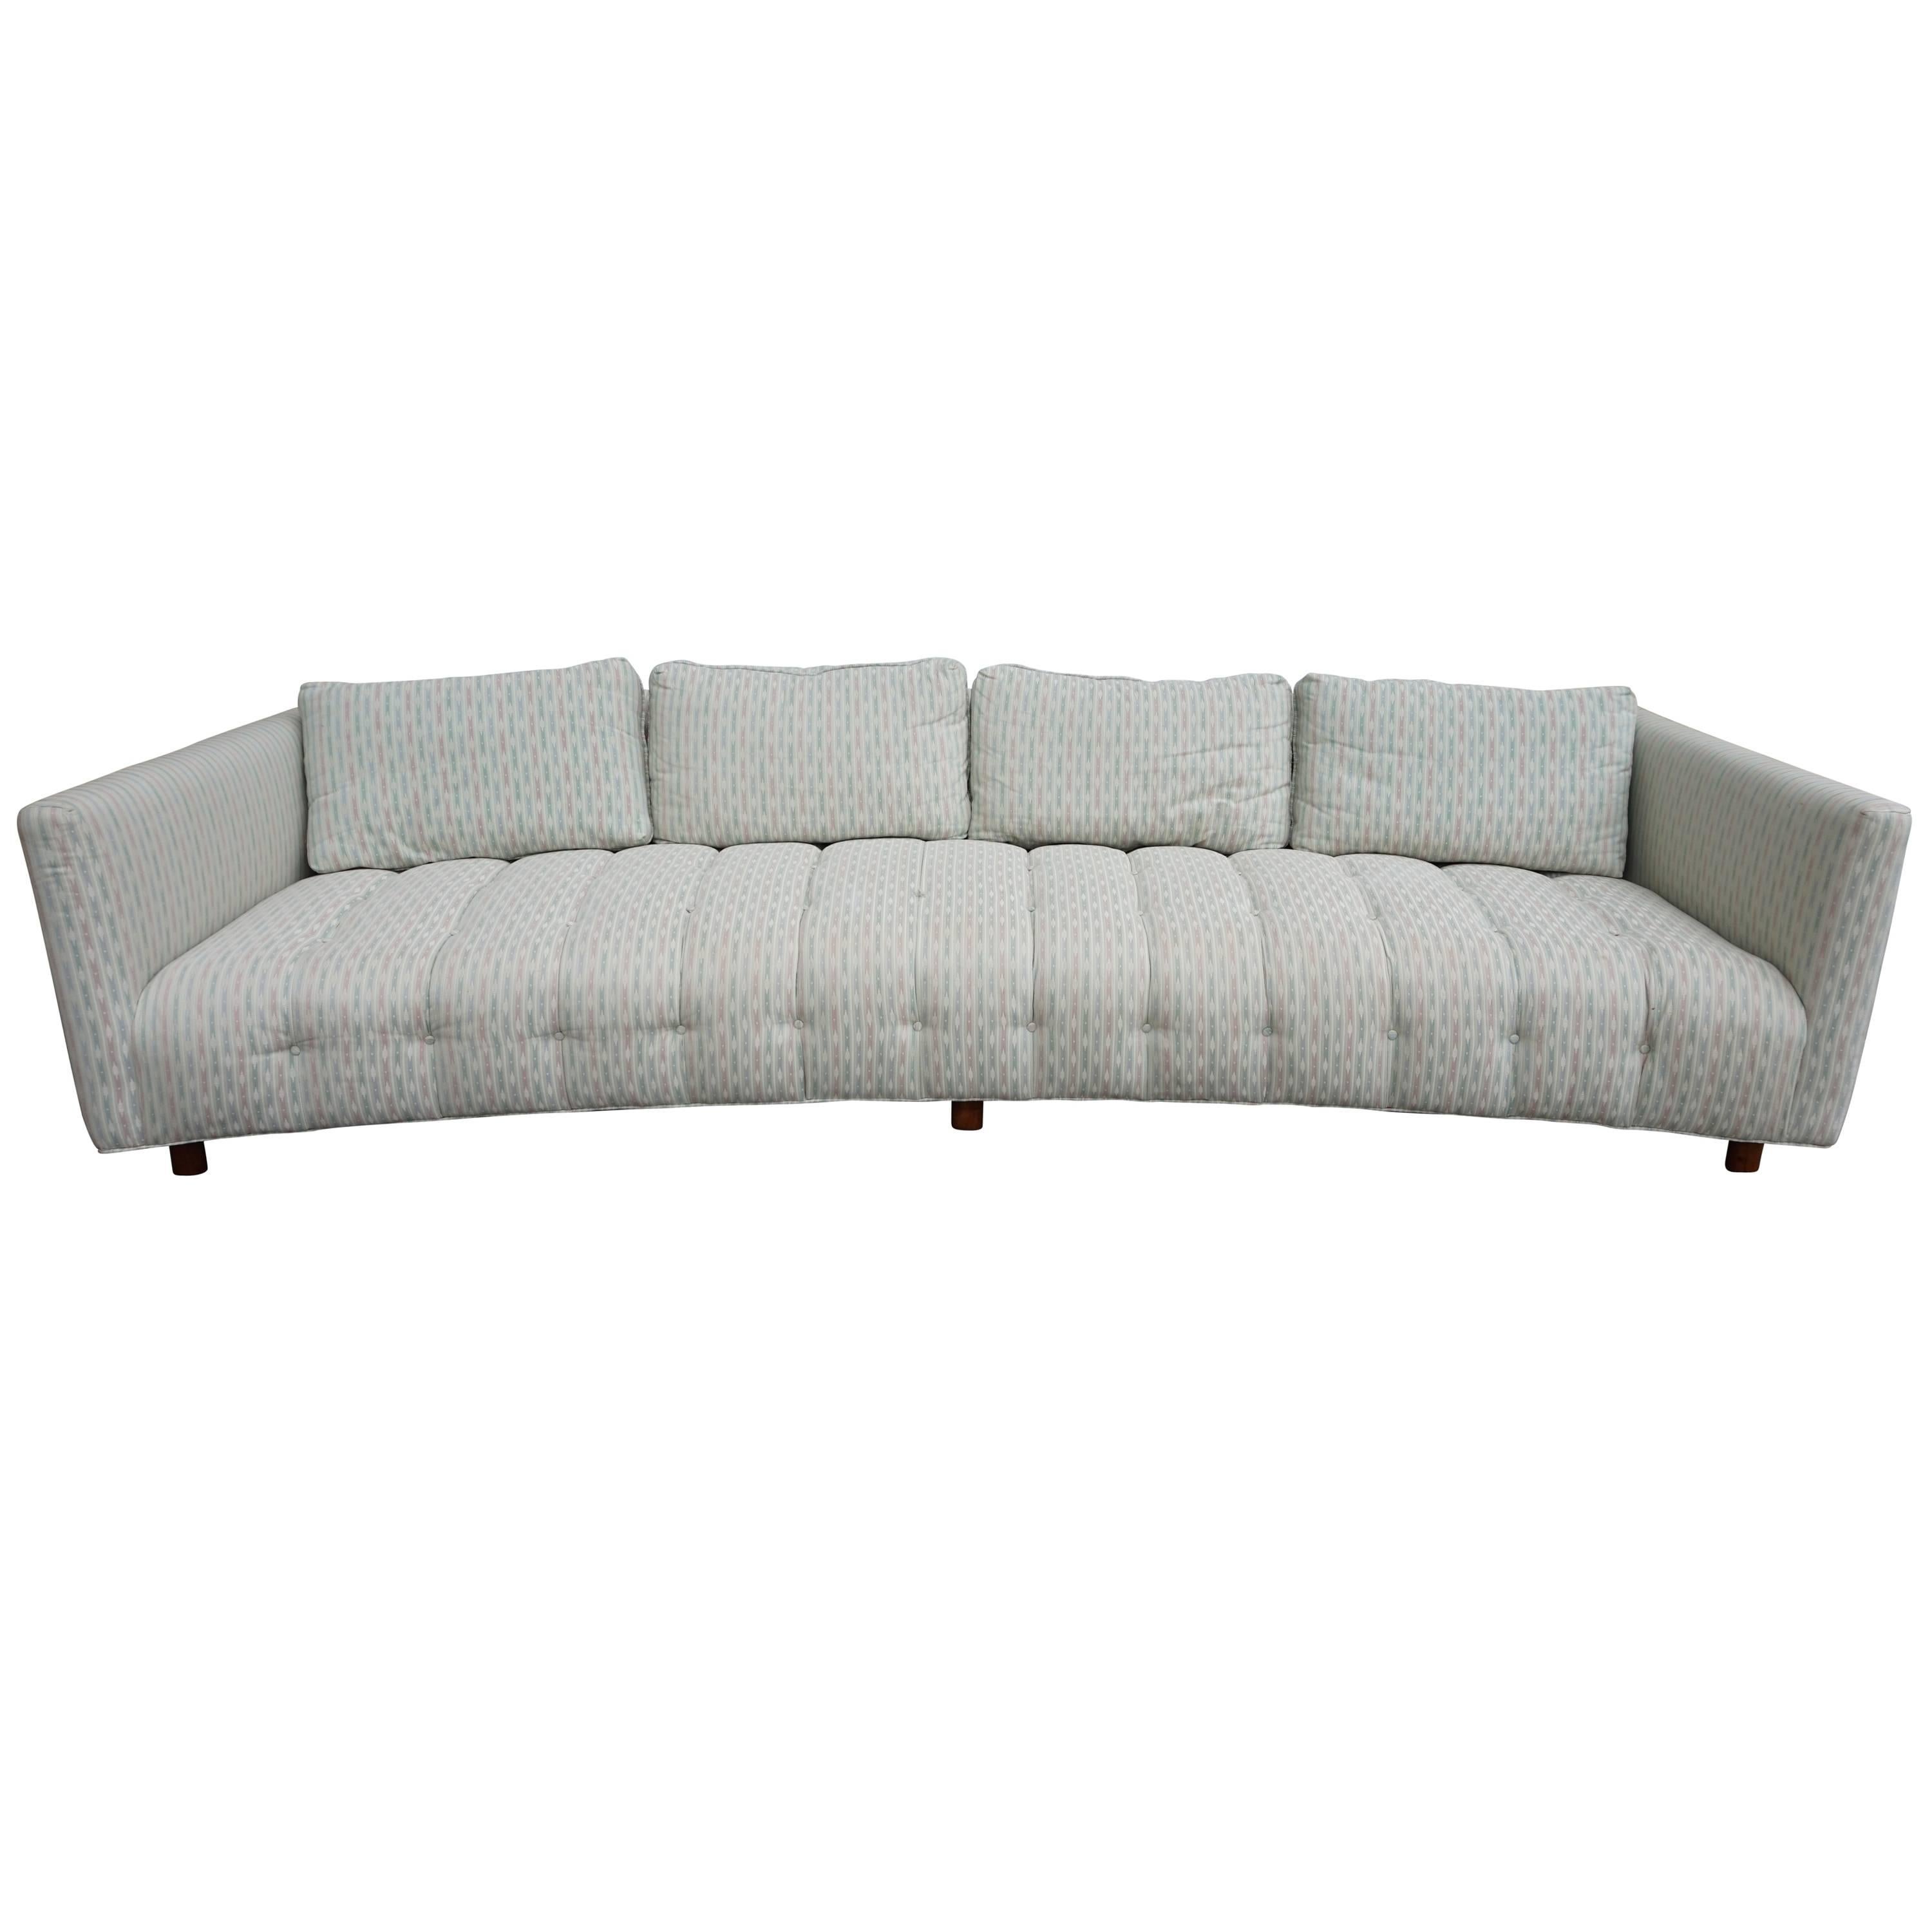 Magnificent Harvey Probber Long Low Curved Four-Seat Sofa, Mid-Century Modern